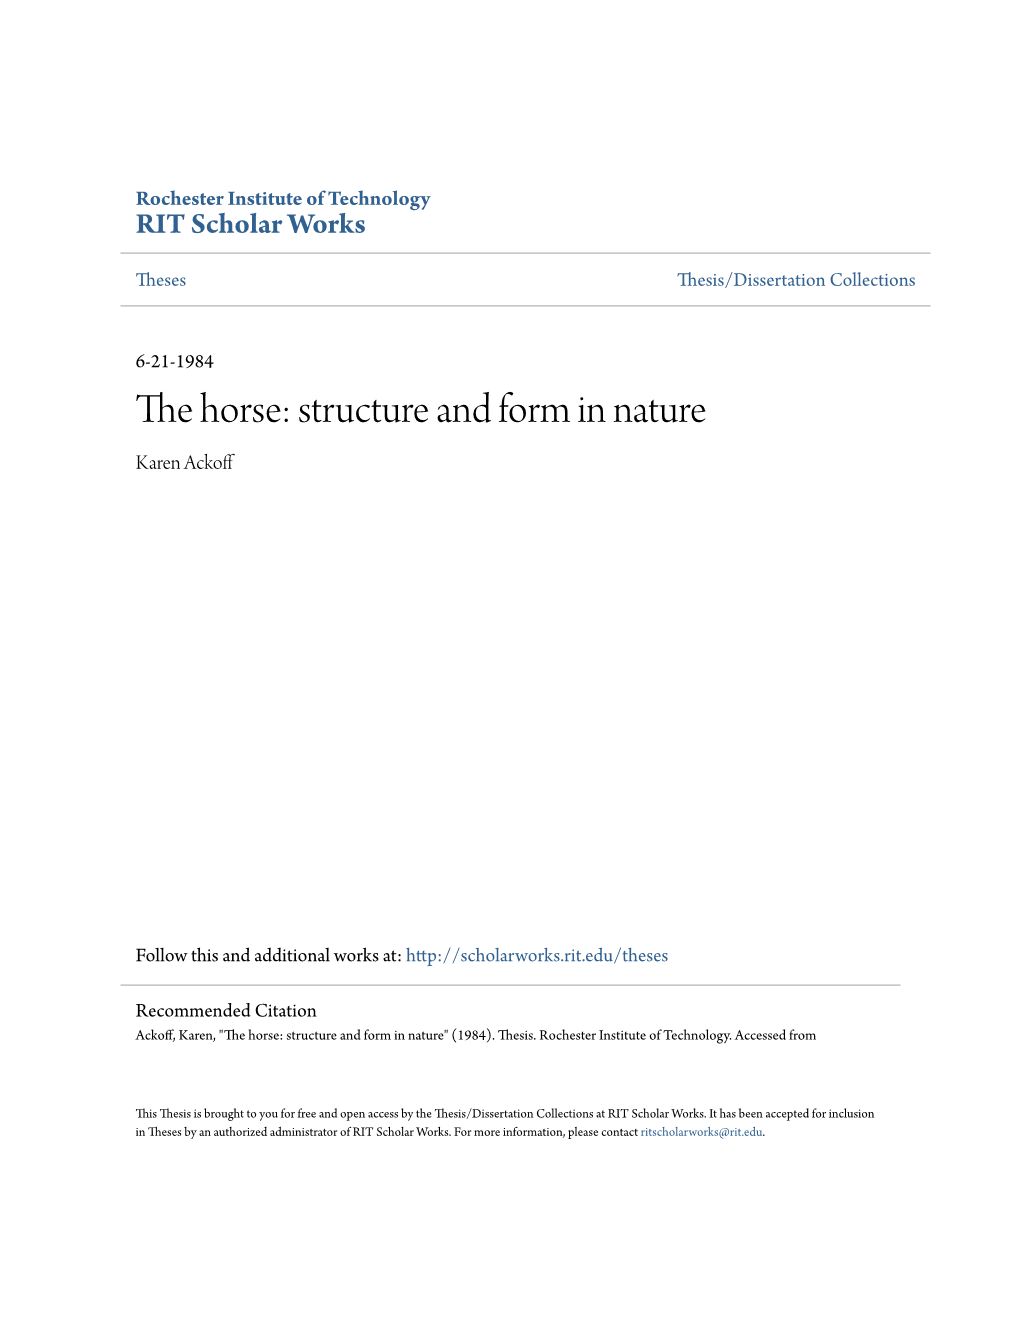 The Horse: Structure and Form in Nature" (1984)